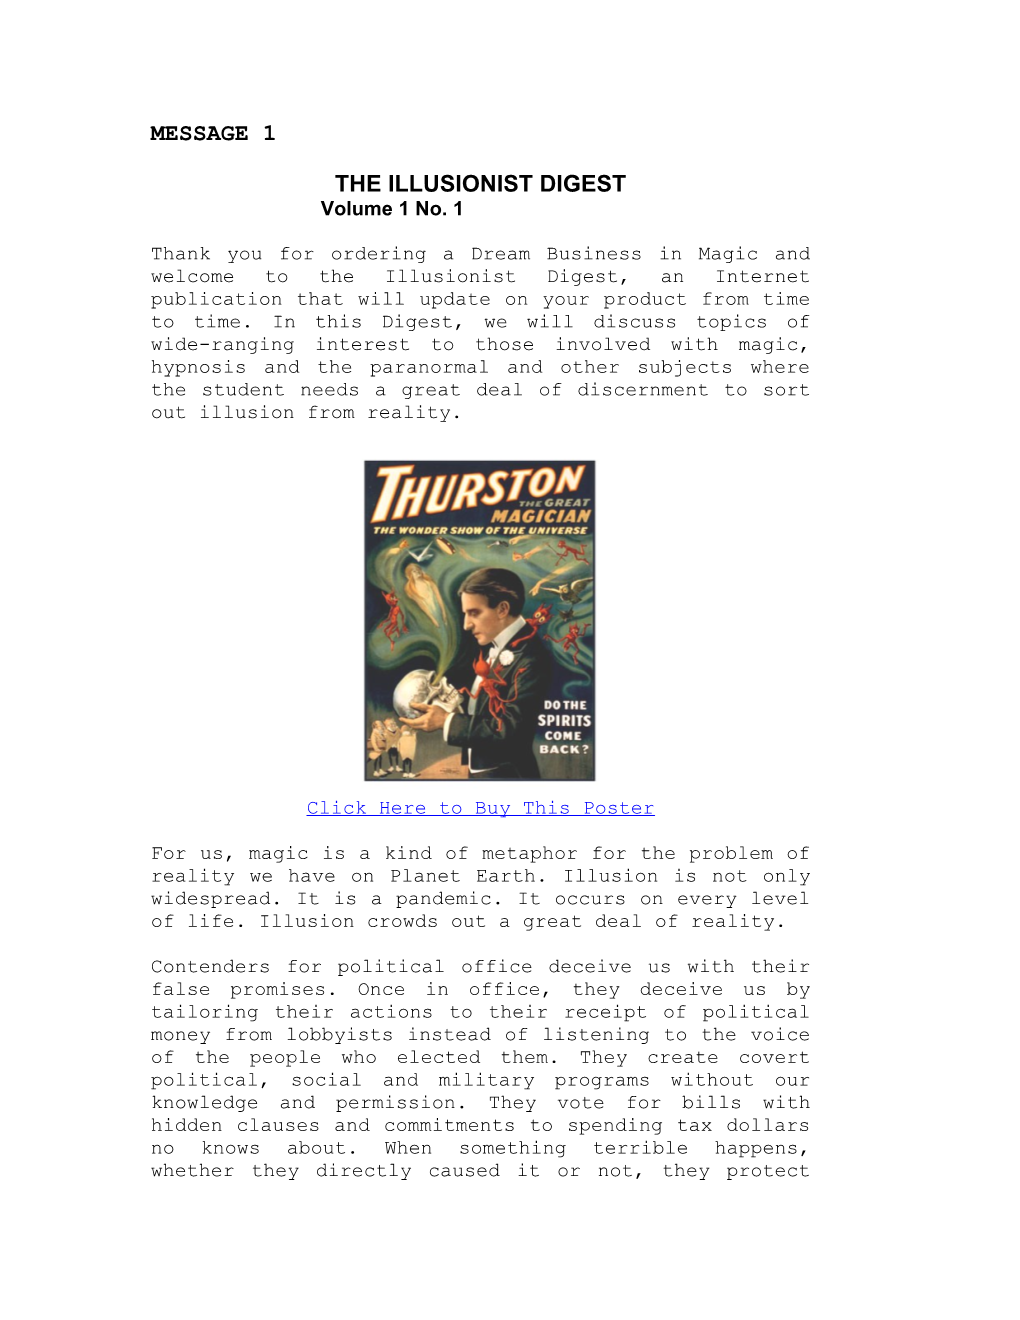 The Illusionist Review